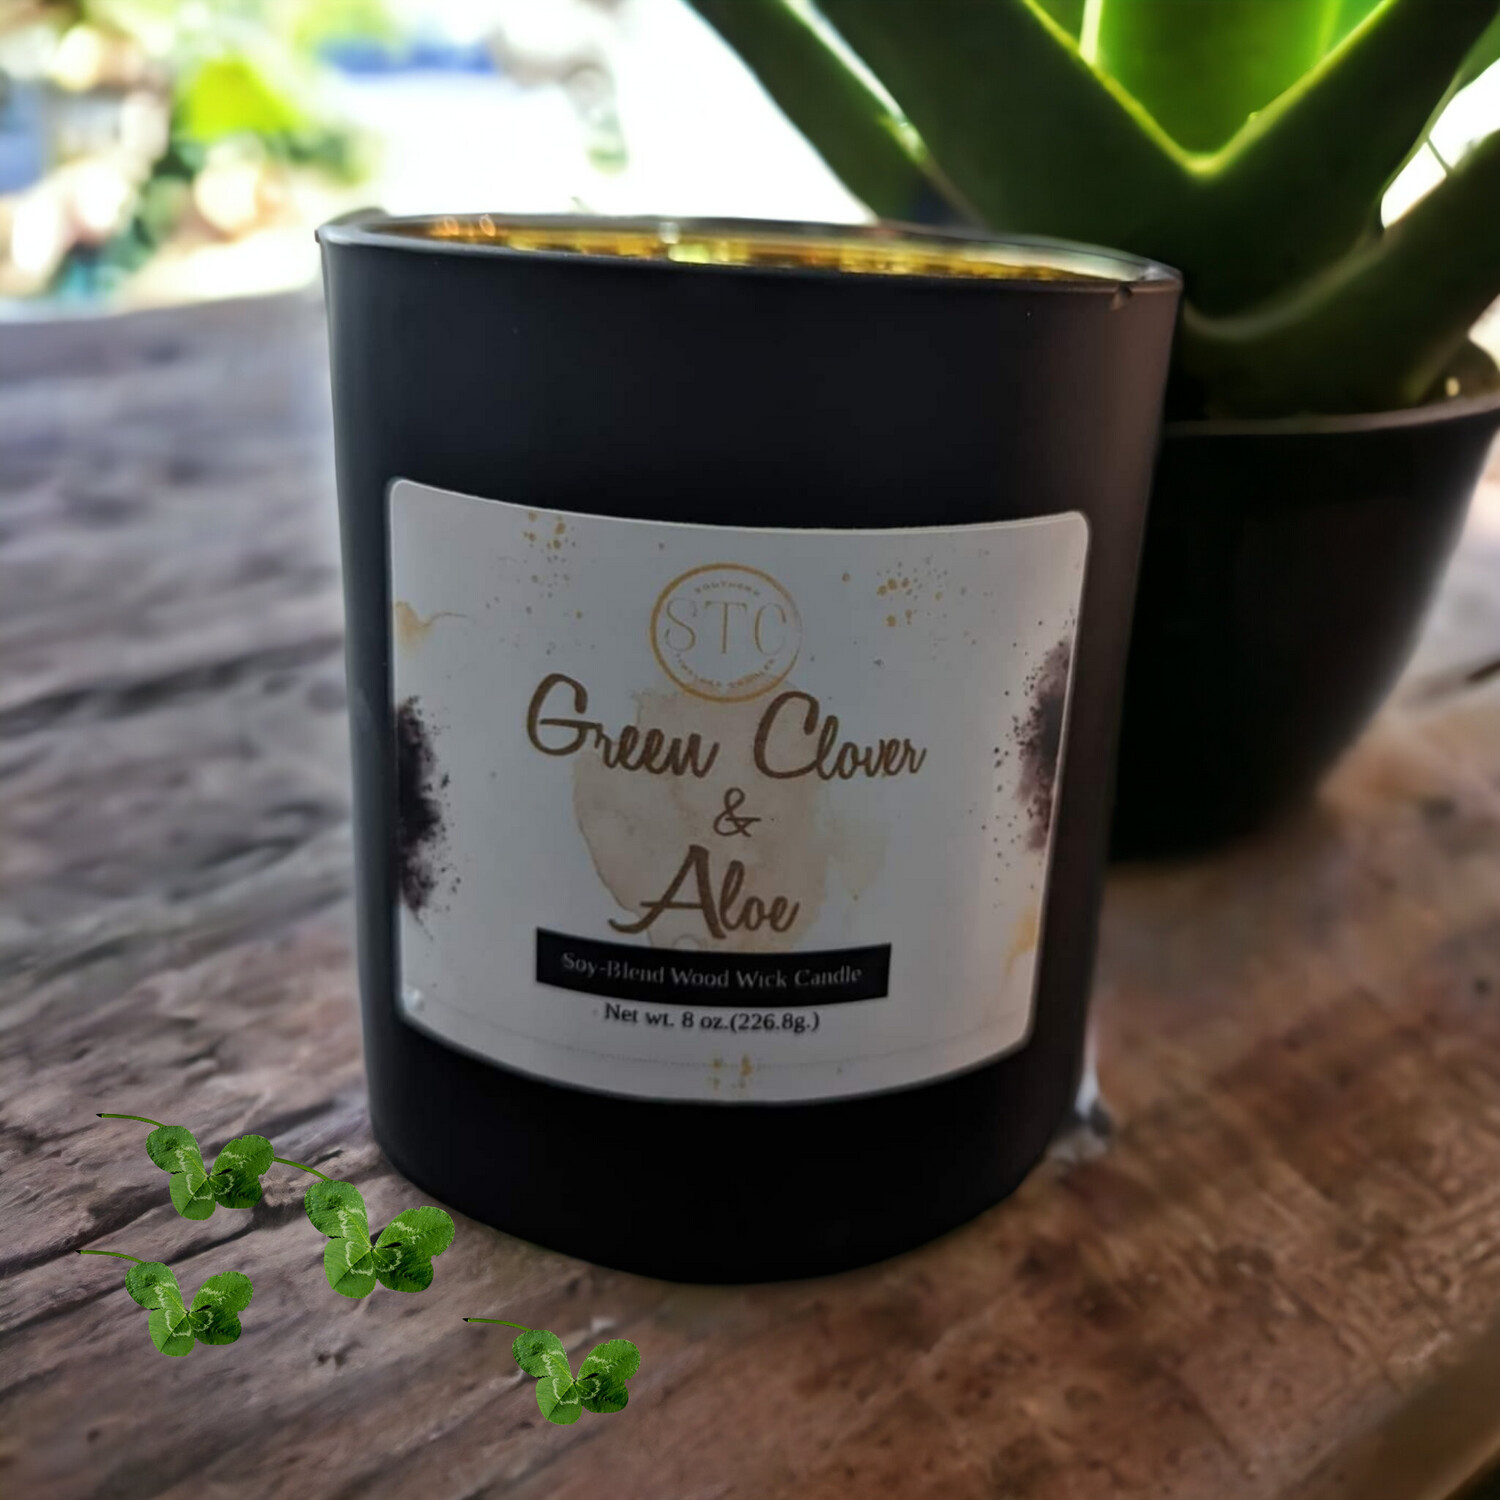 Green Clover & Aloe Wood Wick Candle